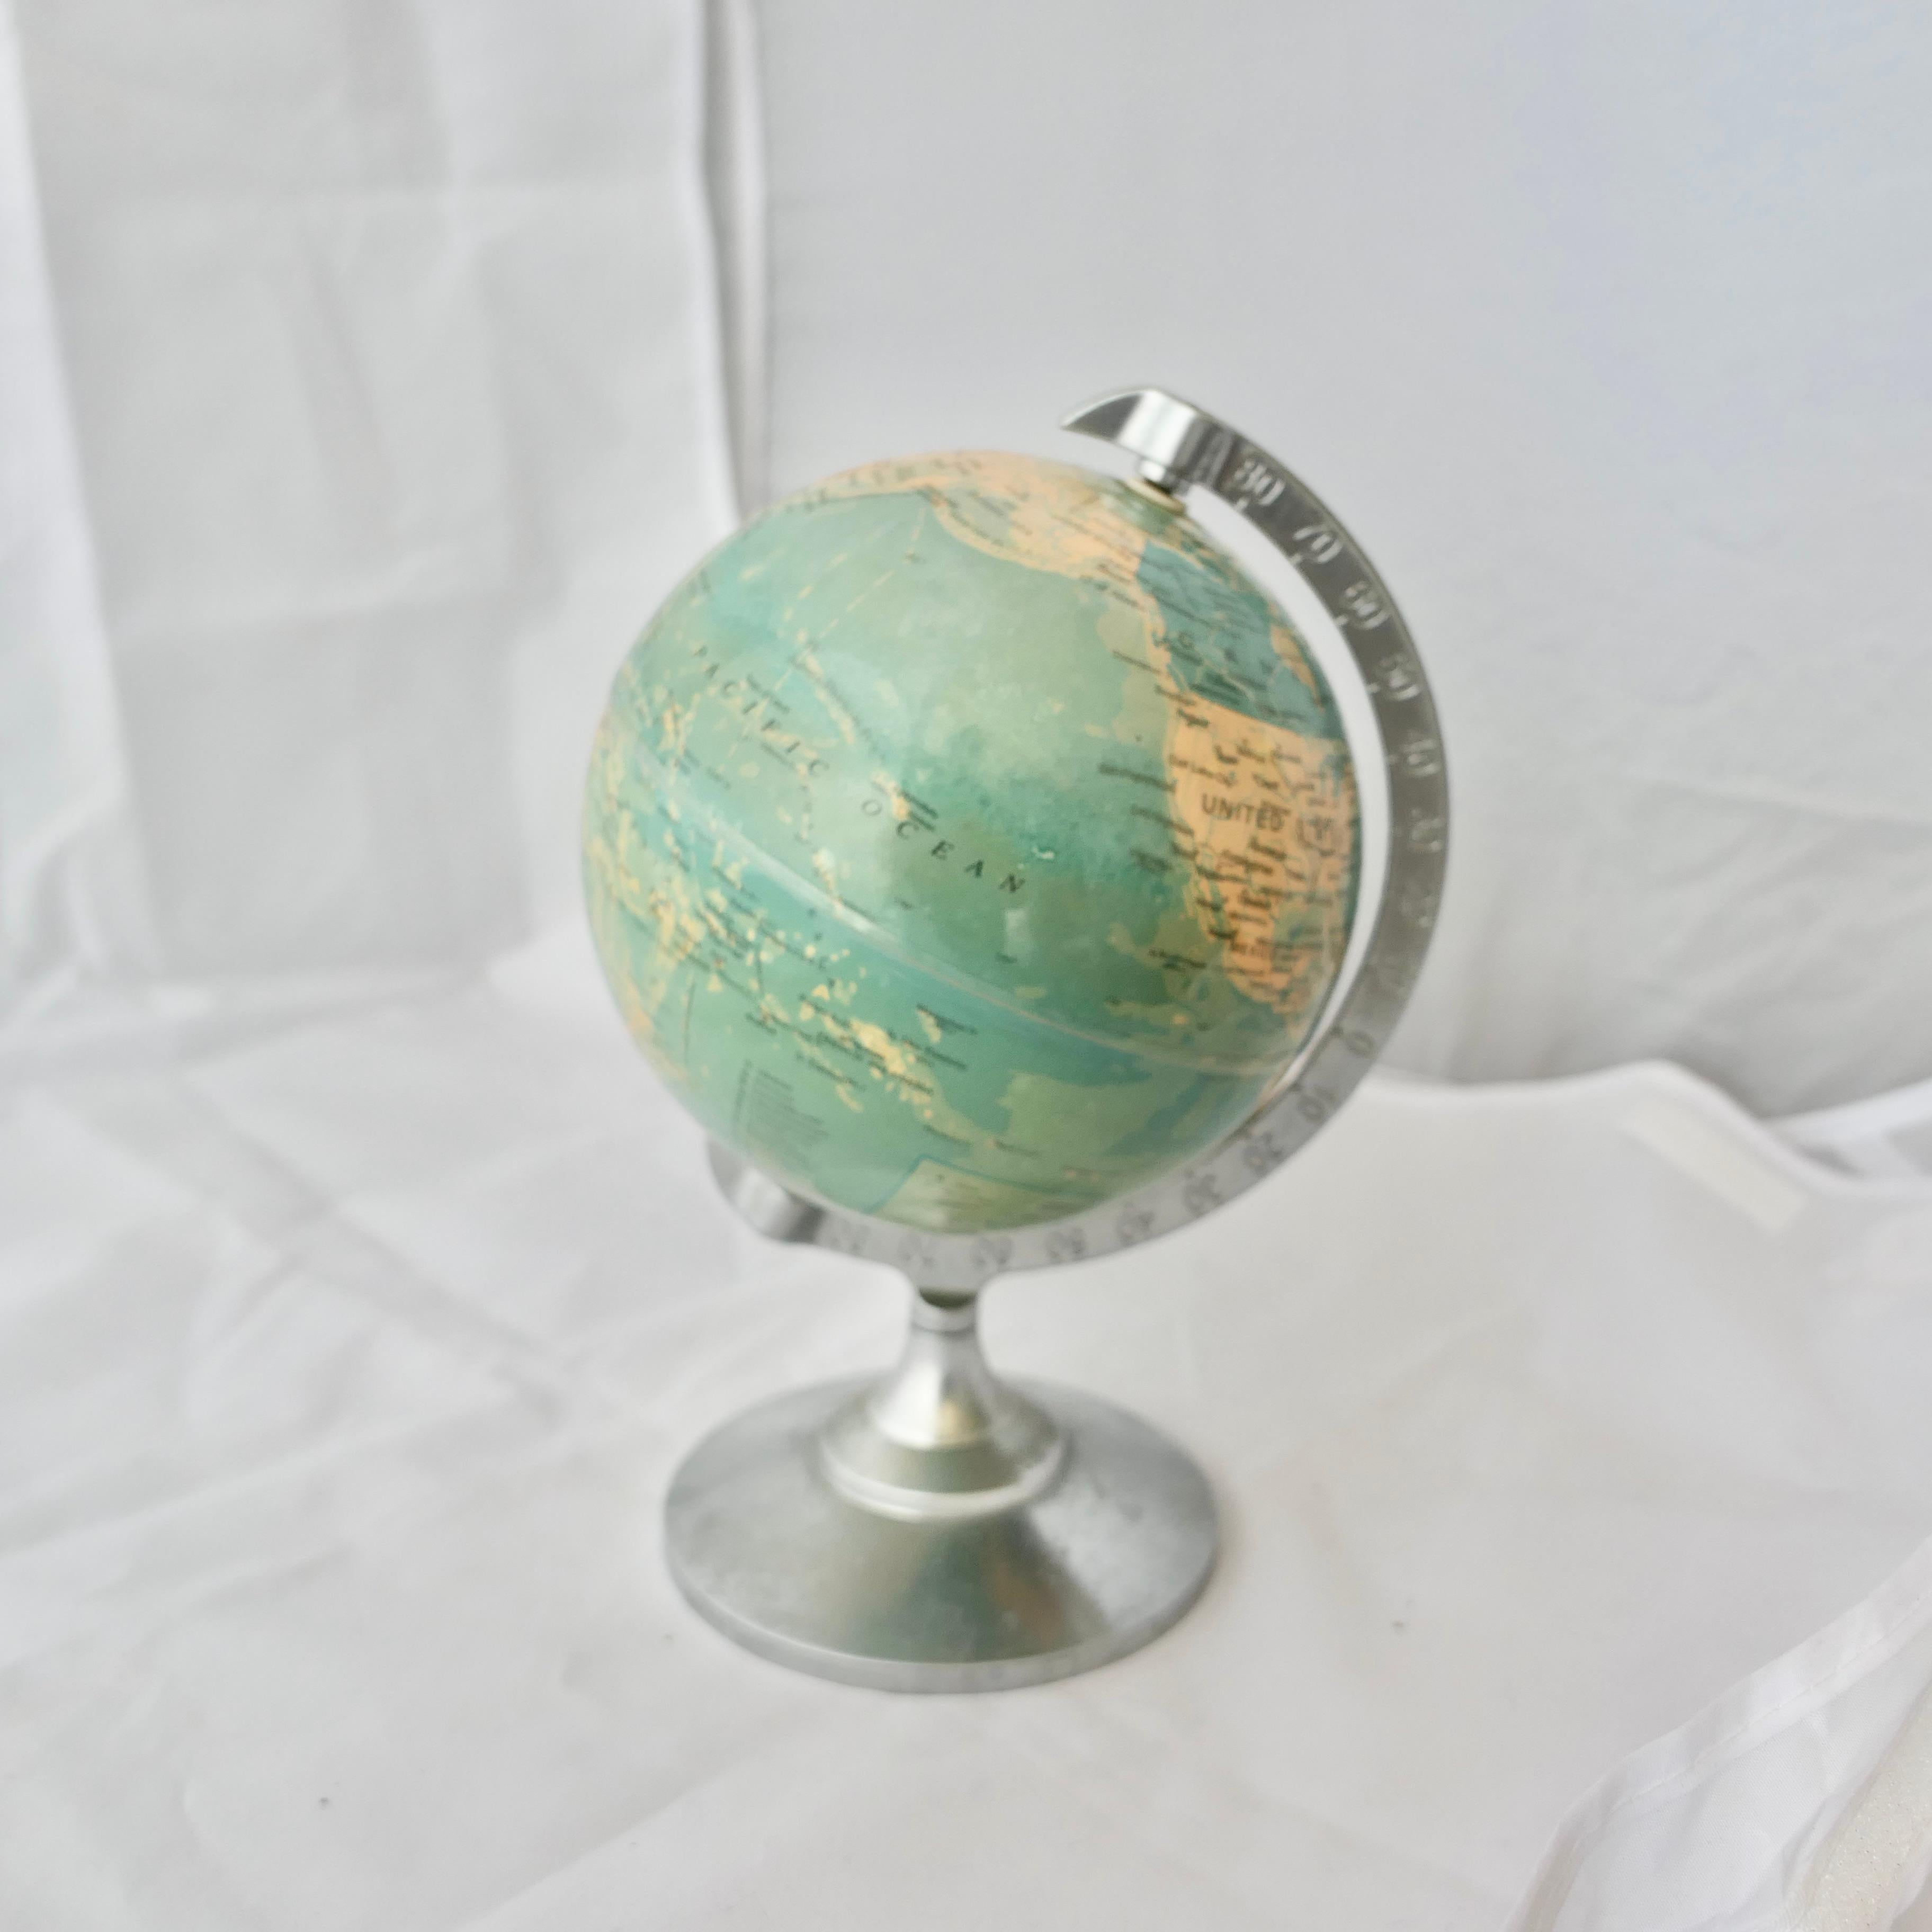  Desk Ornament World Globe with Chromed Stand  A super piece and useful   In Good Condition For Sale In Chillerton, Isle of Wight